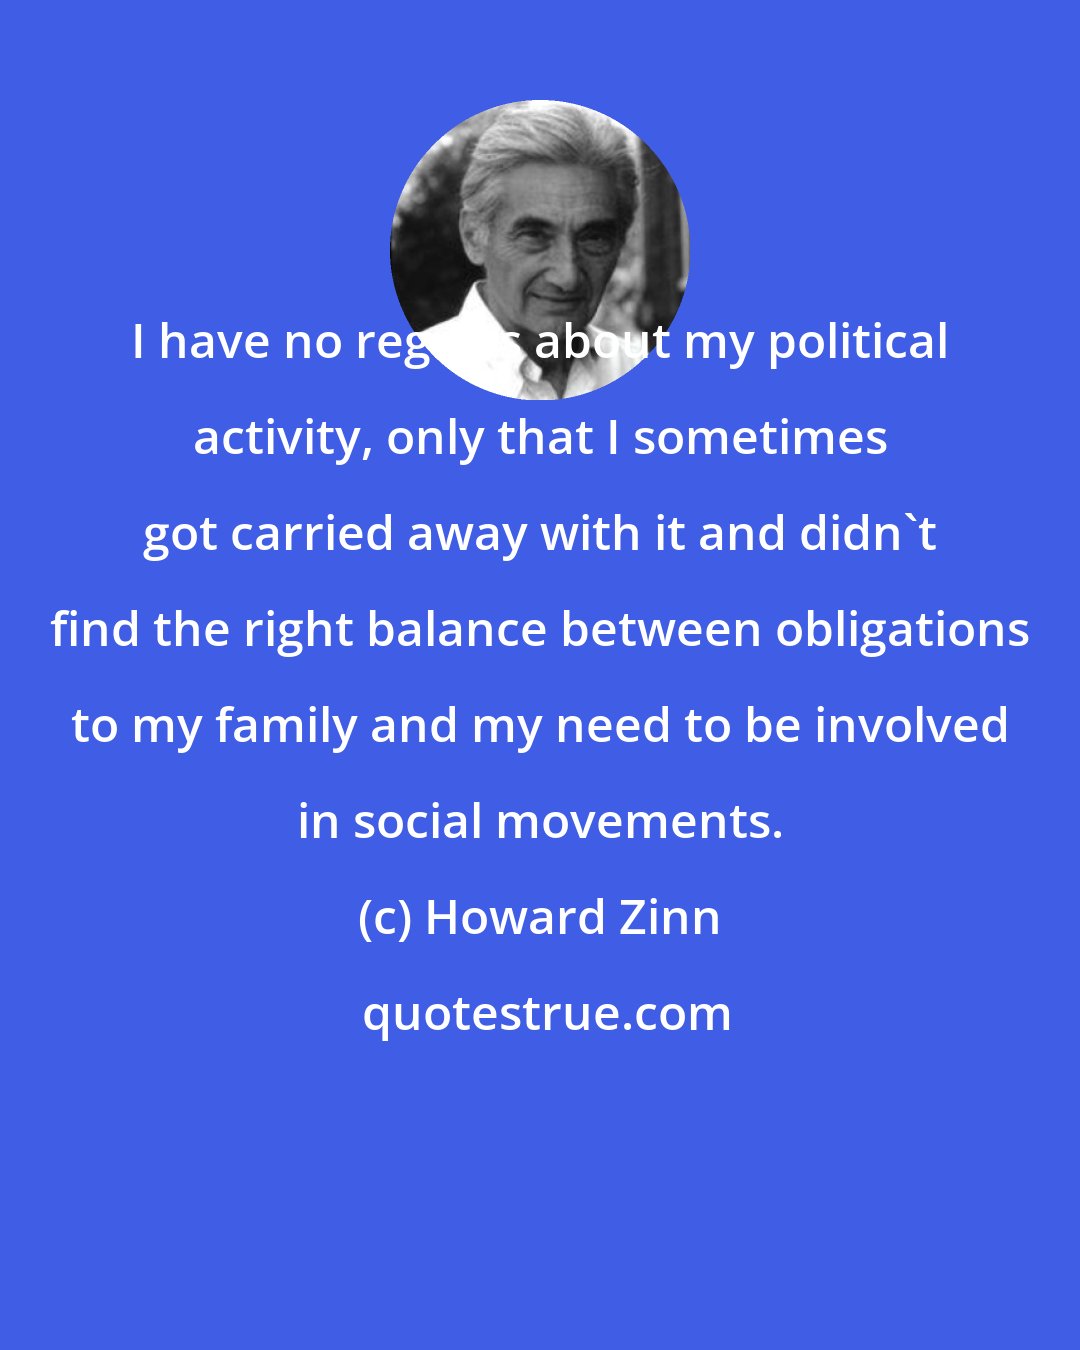 Howard Zinn: I have no regrets about my political activity, only that I sometimes got carried away with it and didn't find the right balance between obligations to my family and my need to be involved in social movements.